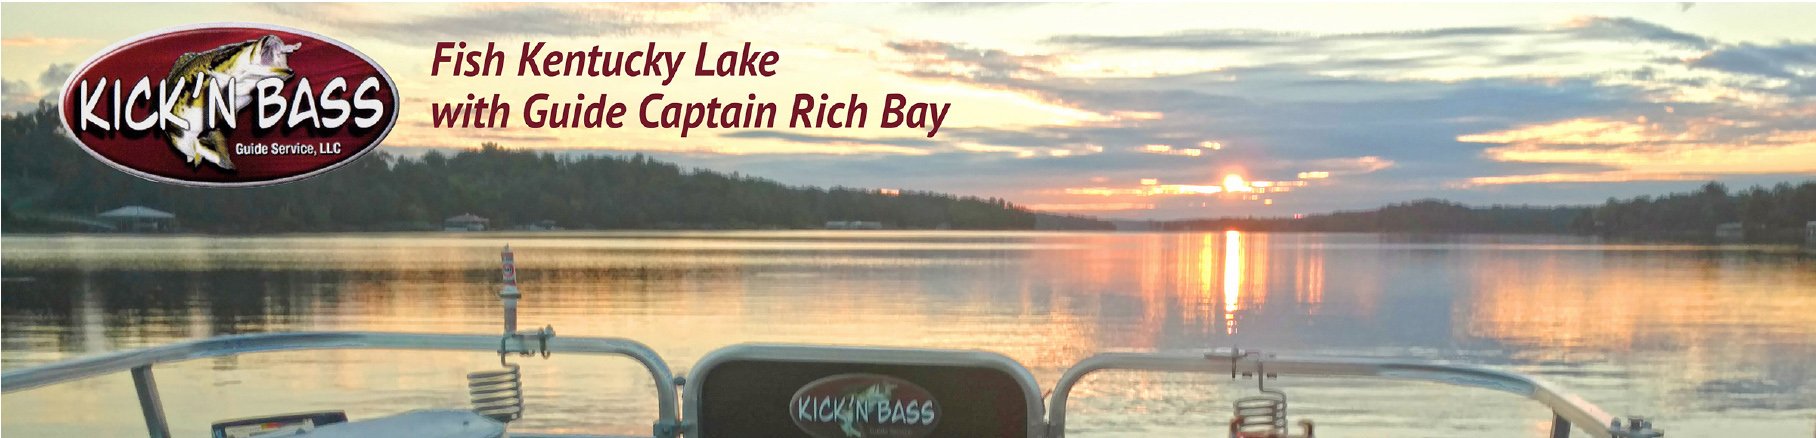 Your Kick'n Bass Fishing Report for April 4, 2018